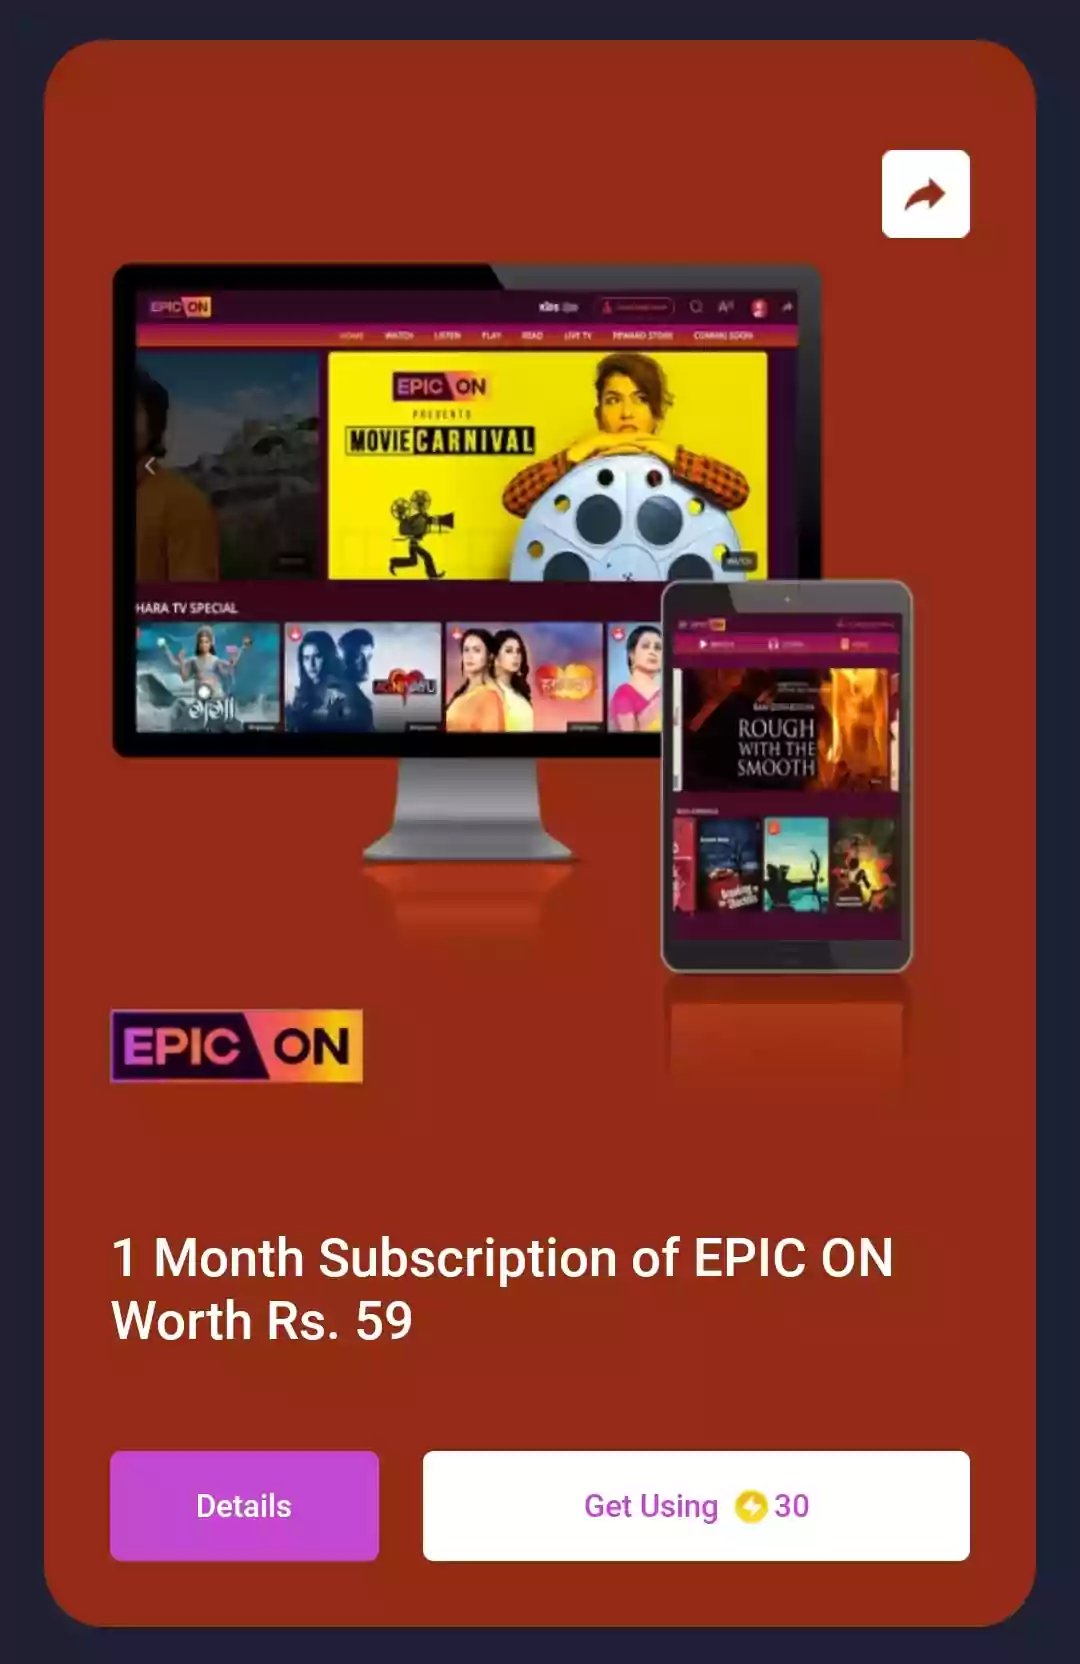 FREE EPIC ON Subscriptions 1 Month Of Worth ₹59 To Use Flipkart SuperCoin 30